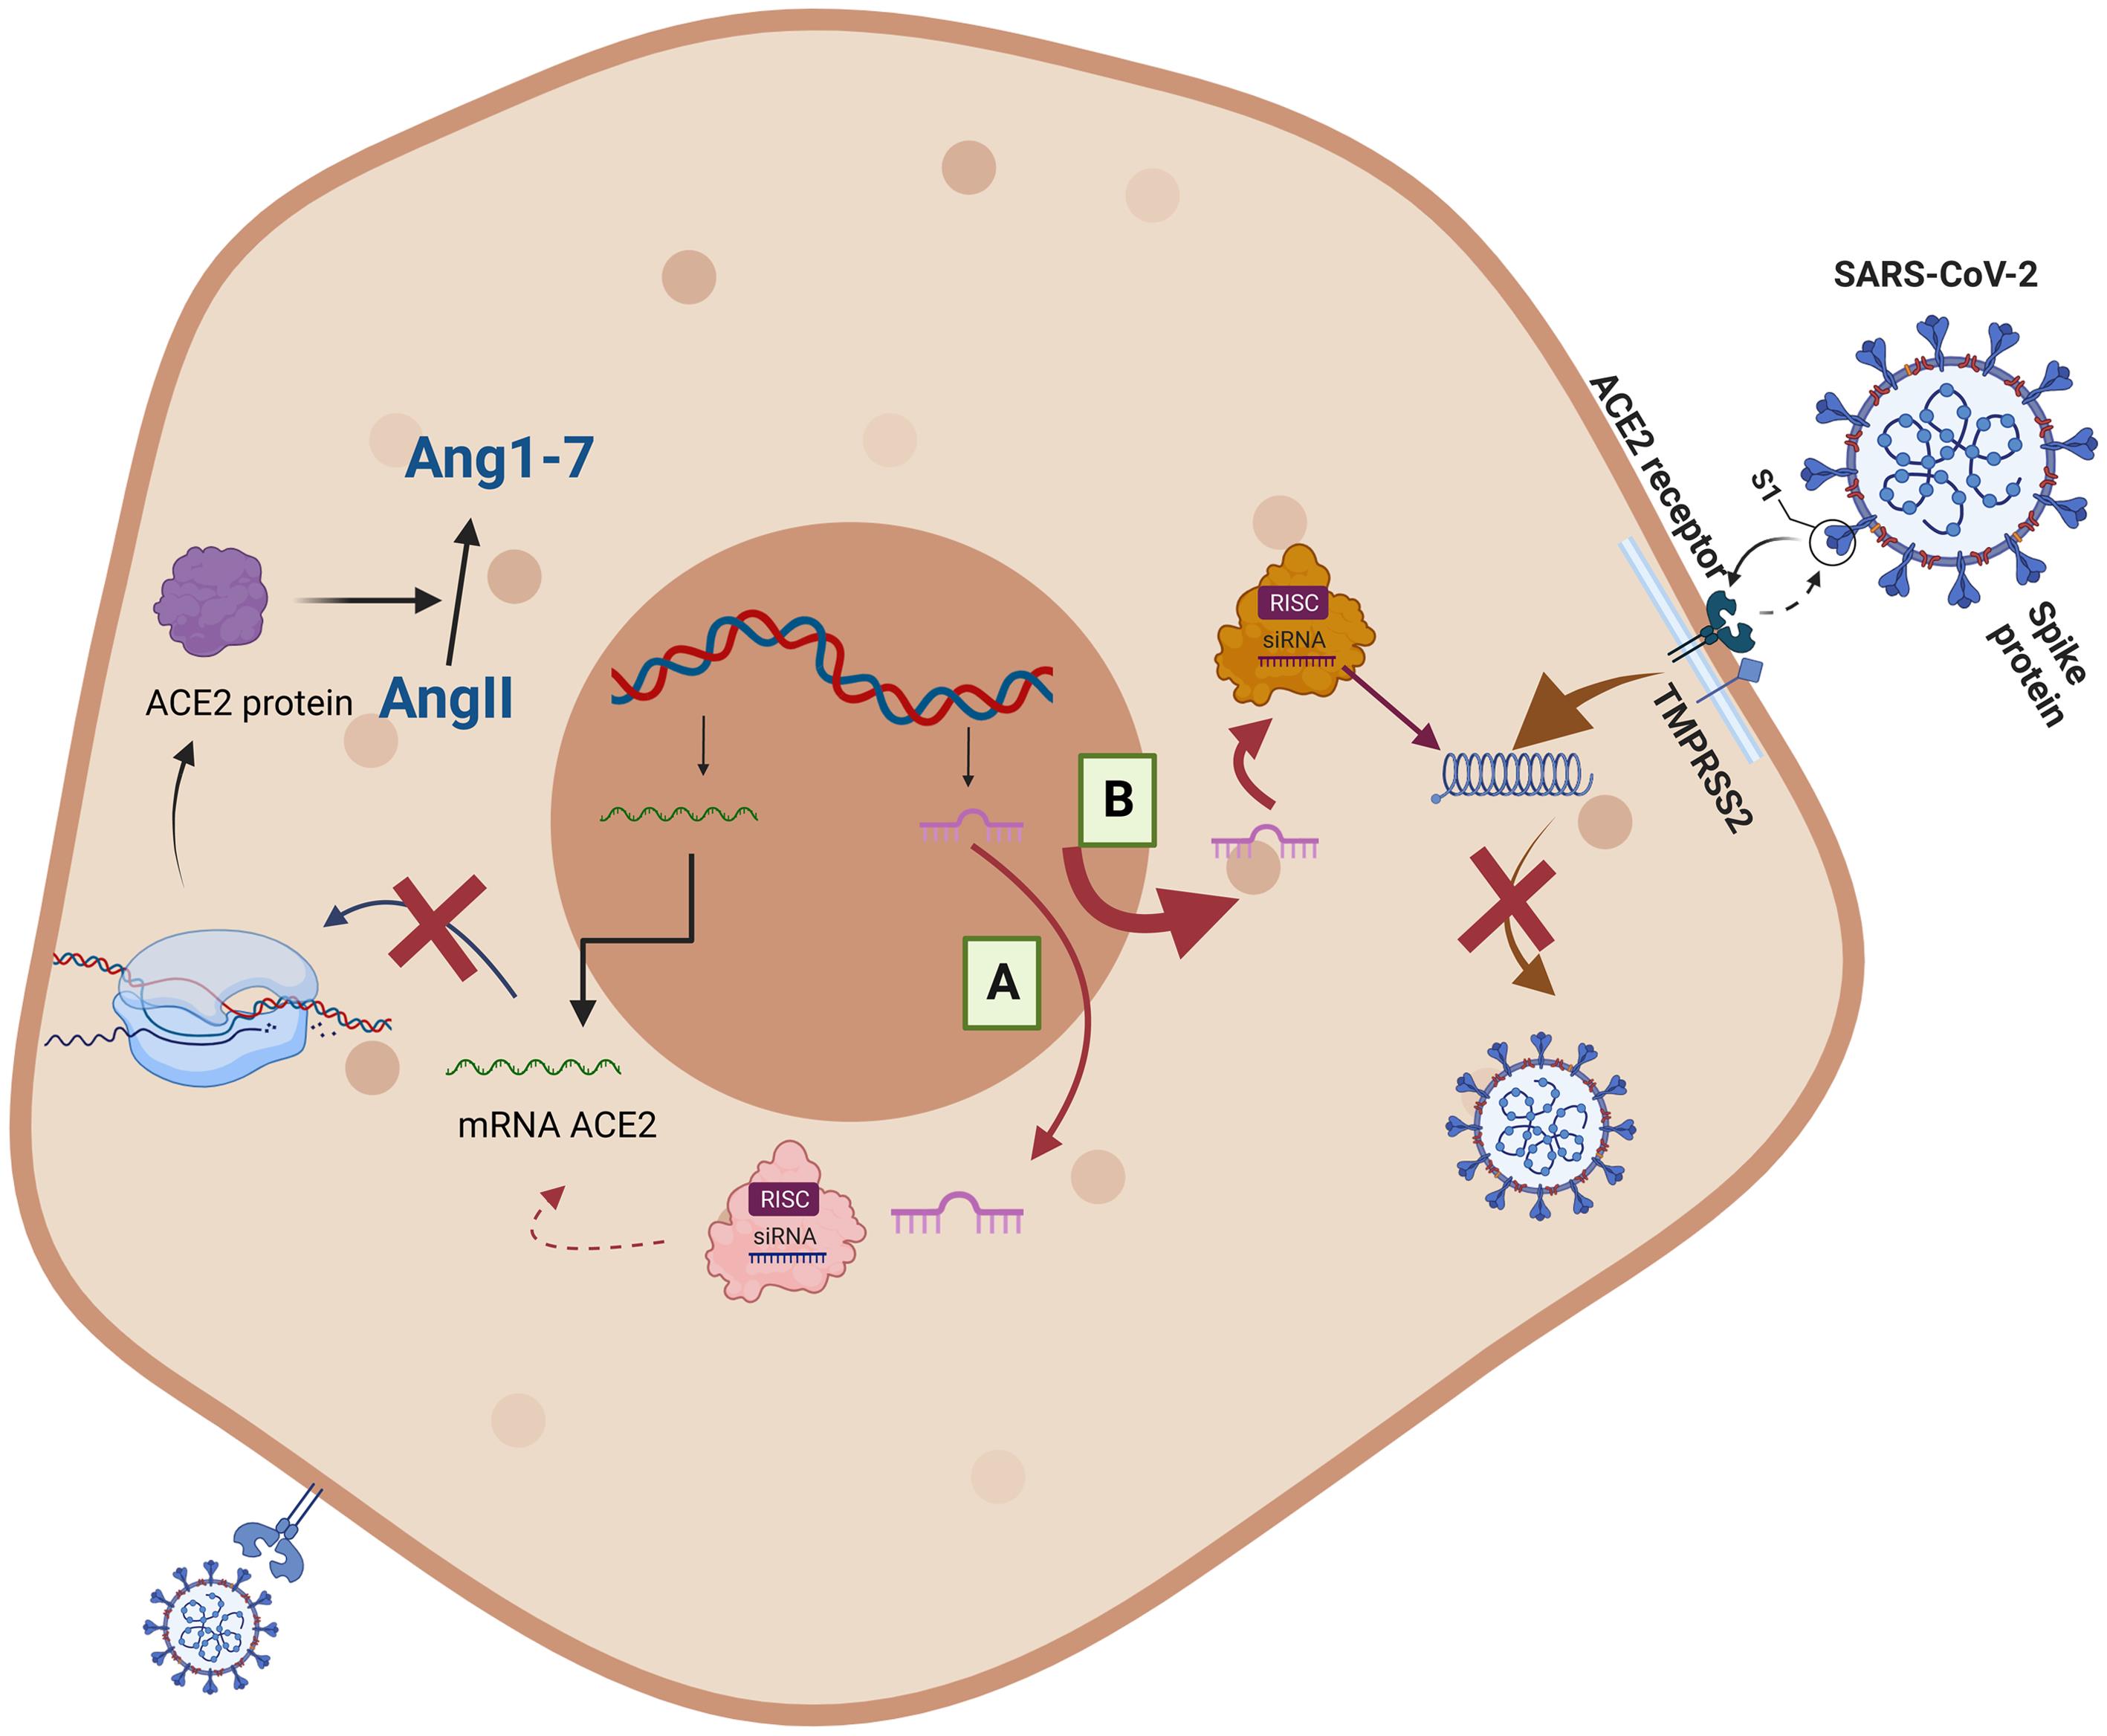 Mechanisms through which microRNAs (miRNAs) may regulate SARS-CoV-2 infectivity.